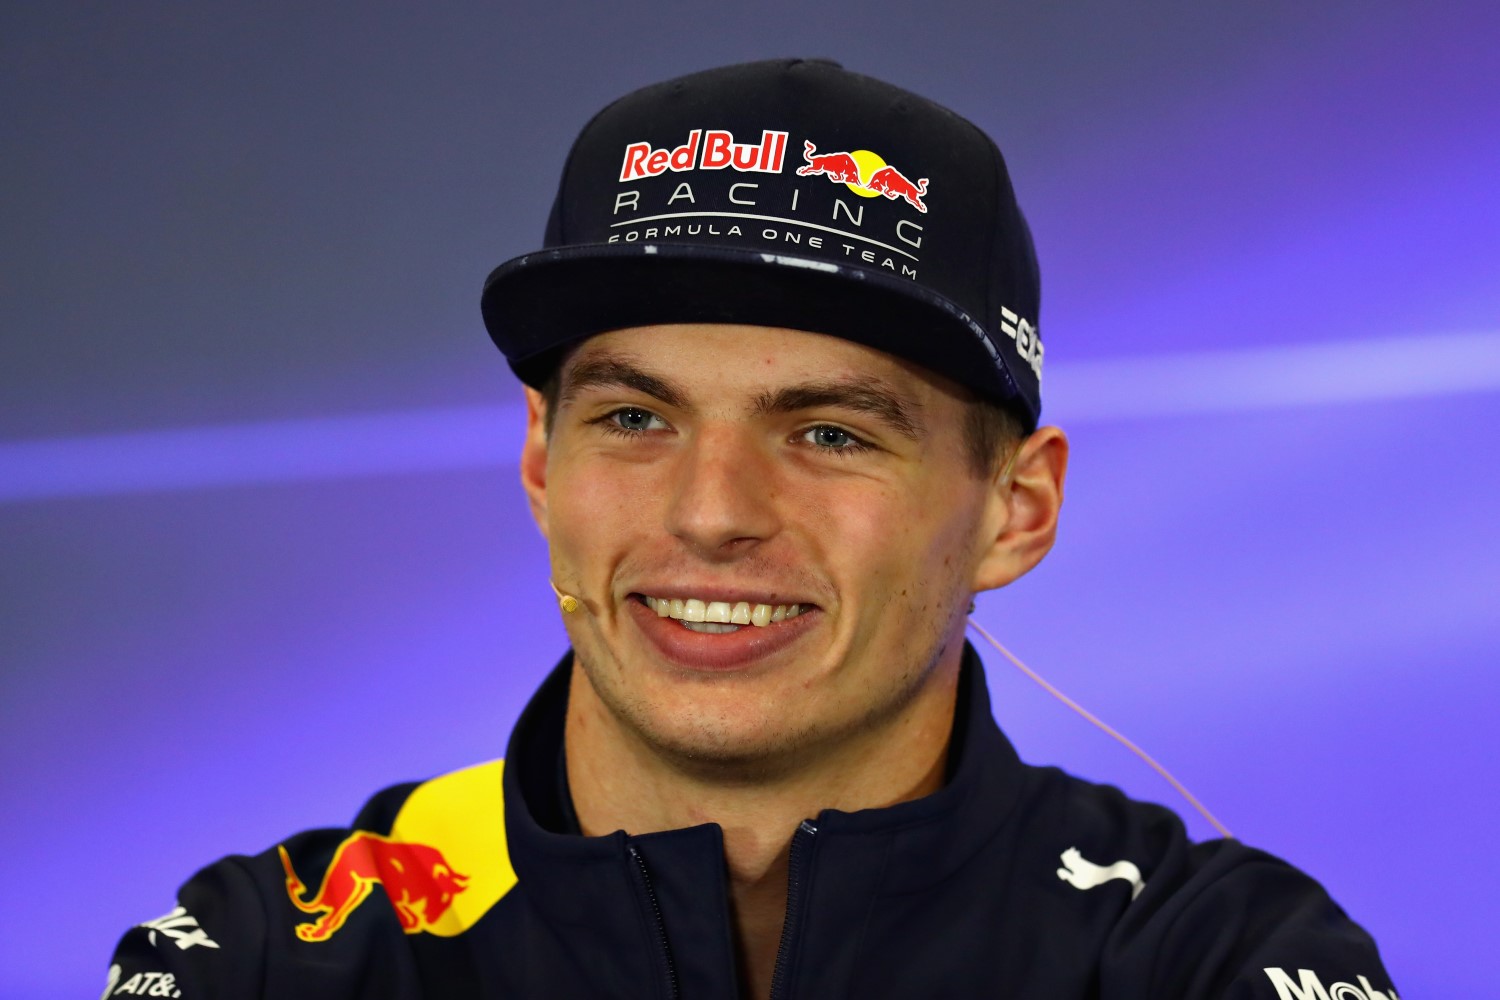 Verstappen knows the future looks bright with Honda power